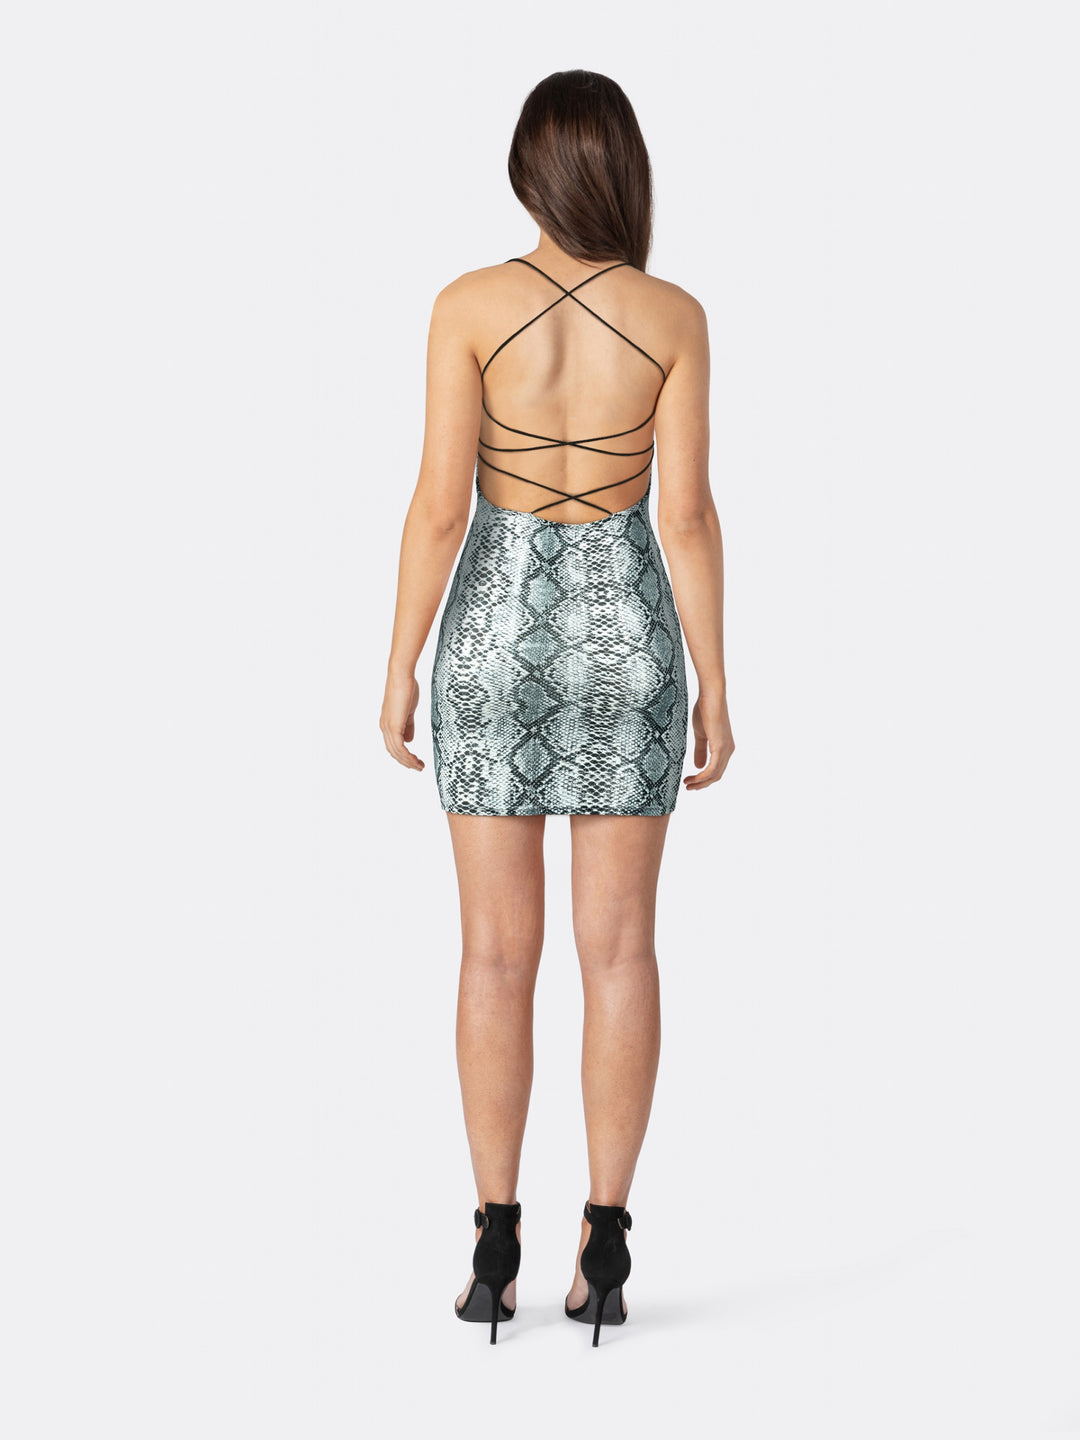 Bodycon Mini Dress Snake Print with Thin Straps that Cross at the Back Back